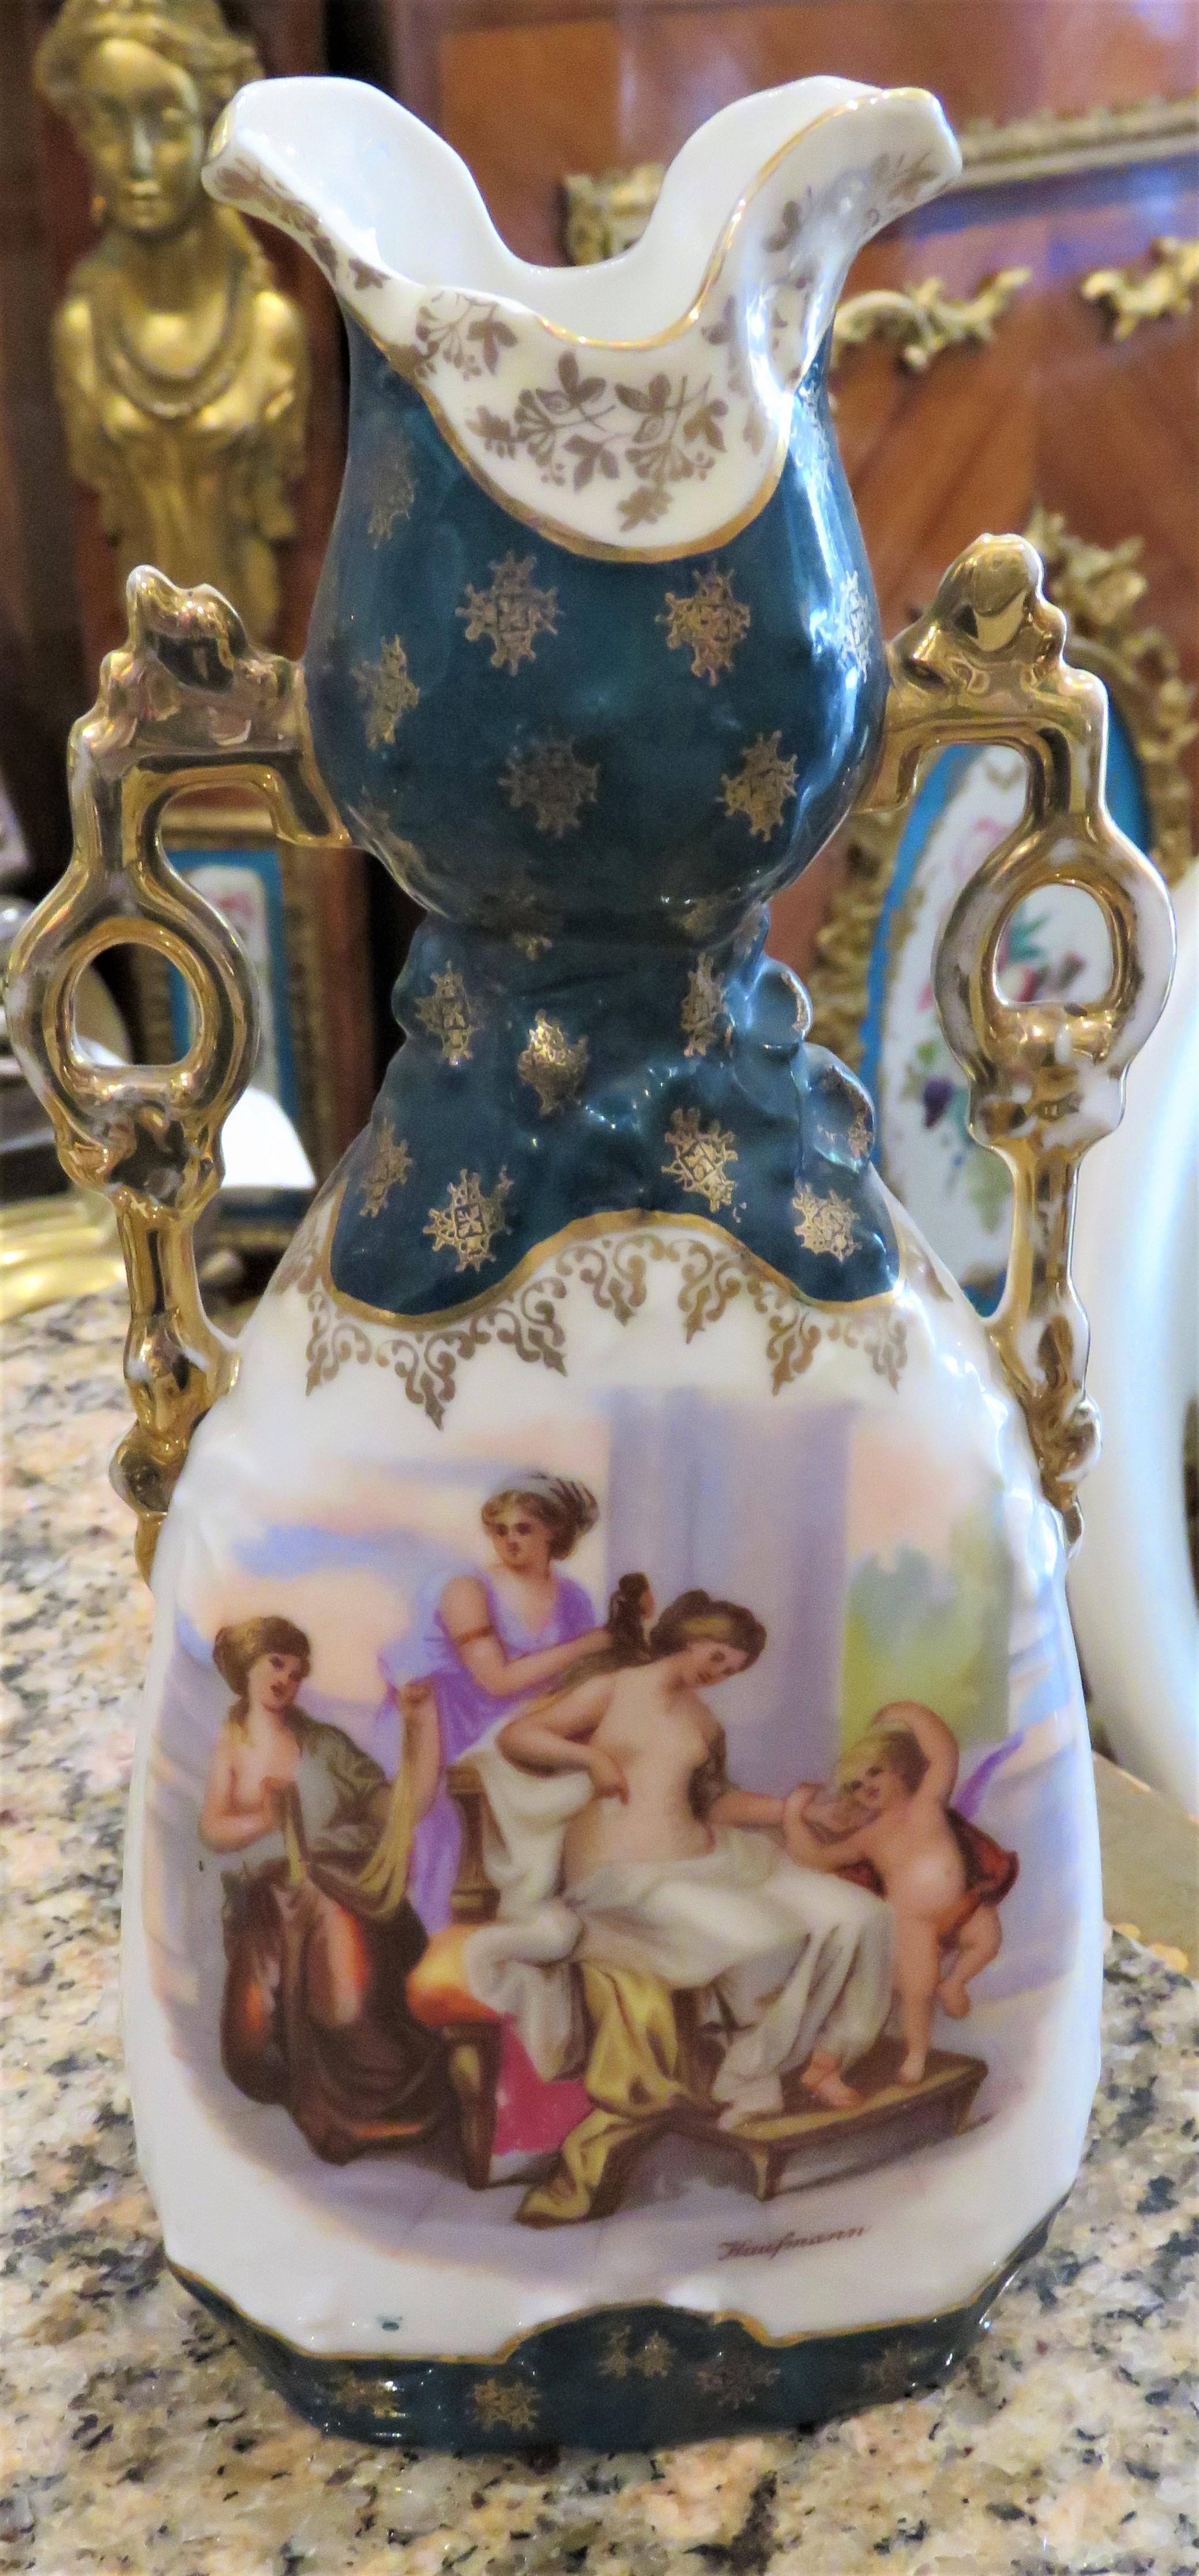 The Following Item we are Offering is a Very Fine Magnificent Royal Vienna Austrian Kaufmann Porcelain Vase. Vase has a Portrait of Maidens Sitting Outdoors with a Child. Finely Detailed with Gold Accent Details painted on a Green and White